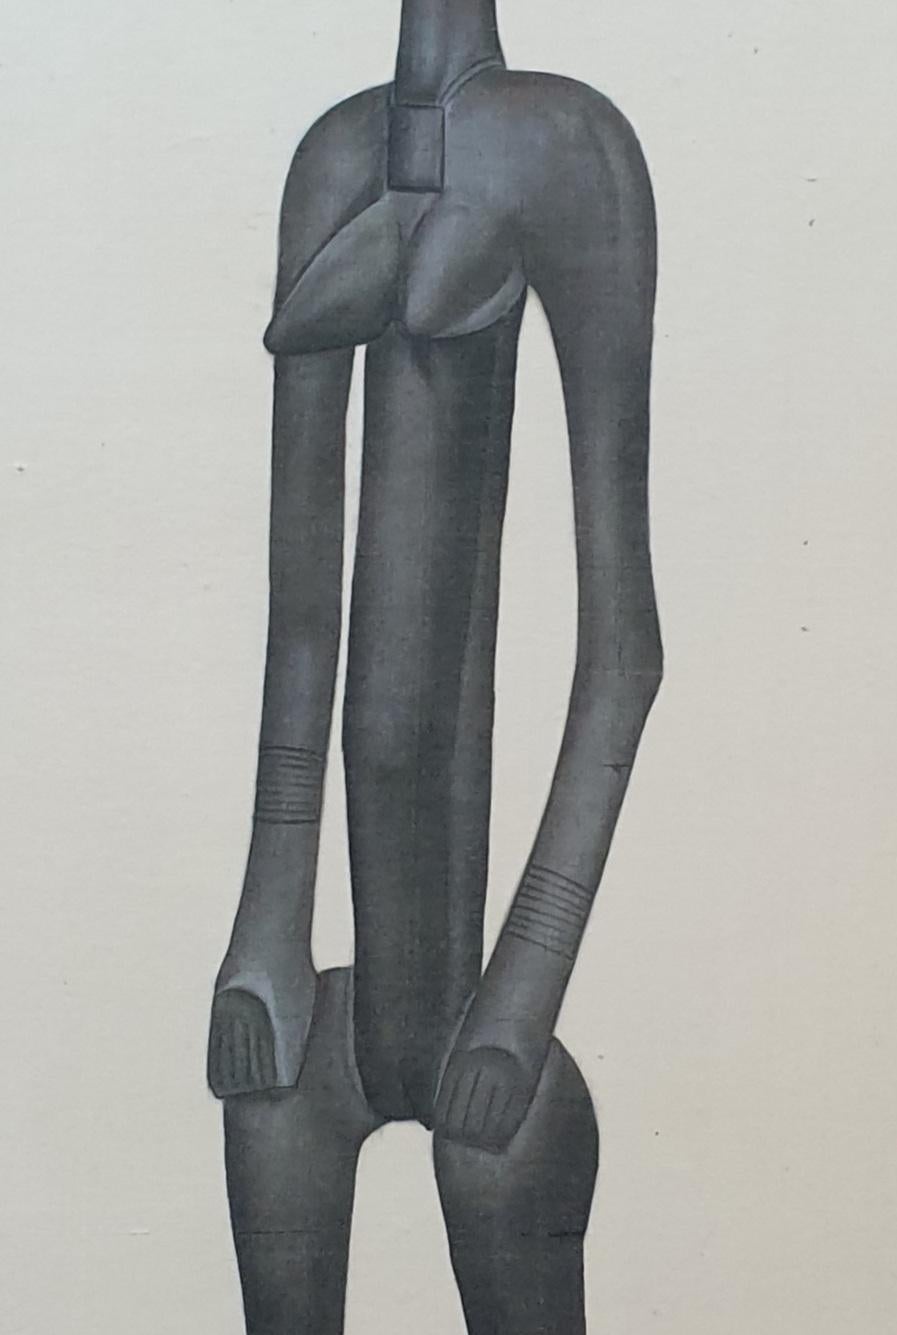 African Senoufo Figure. Watercolour on Handmade Paper Laid on Vélin d'Arches For Sale 5